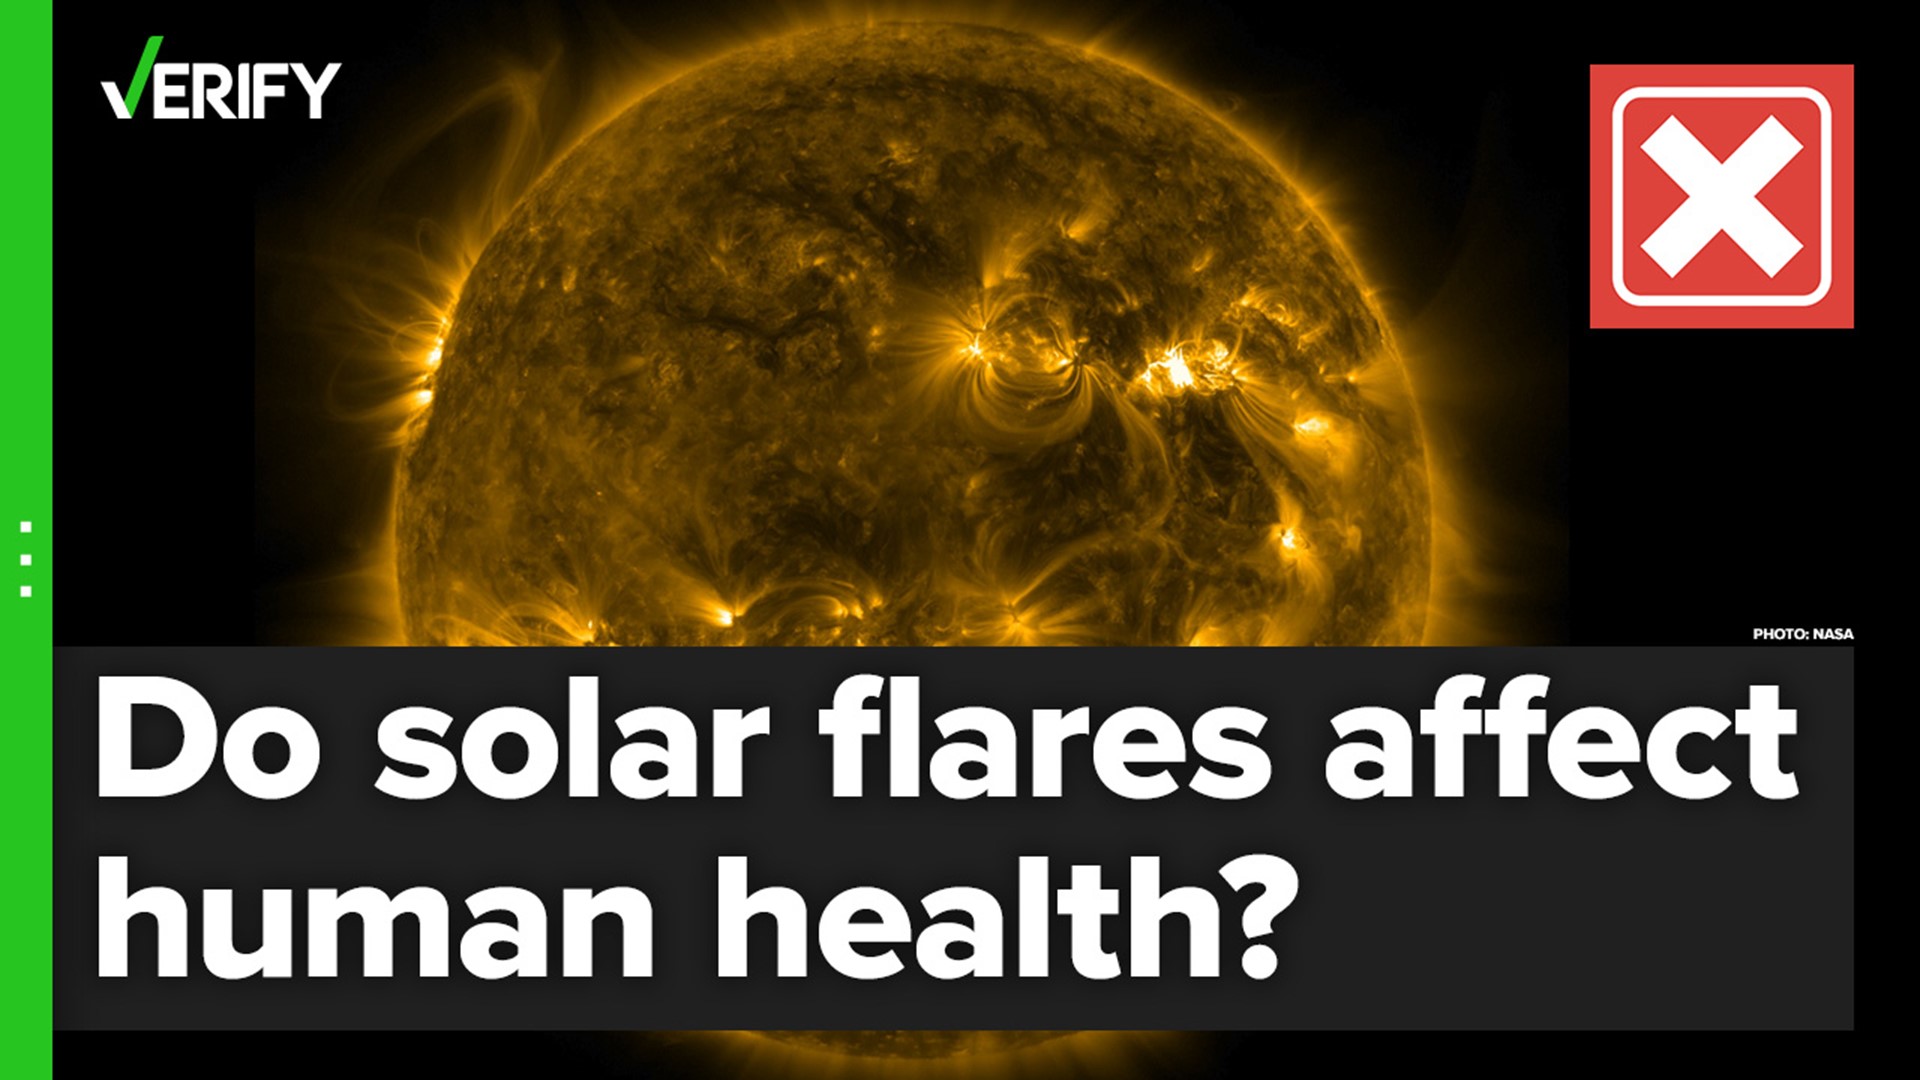 Watch the Sun belch out two powerful solar flares